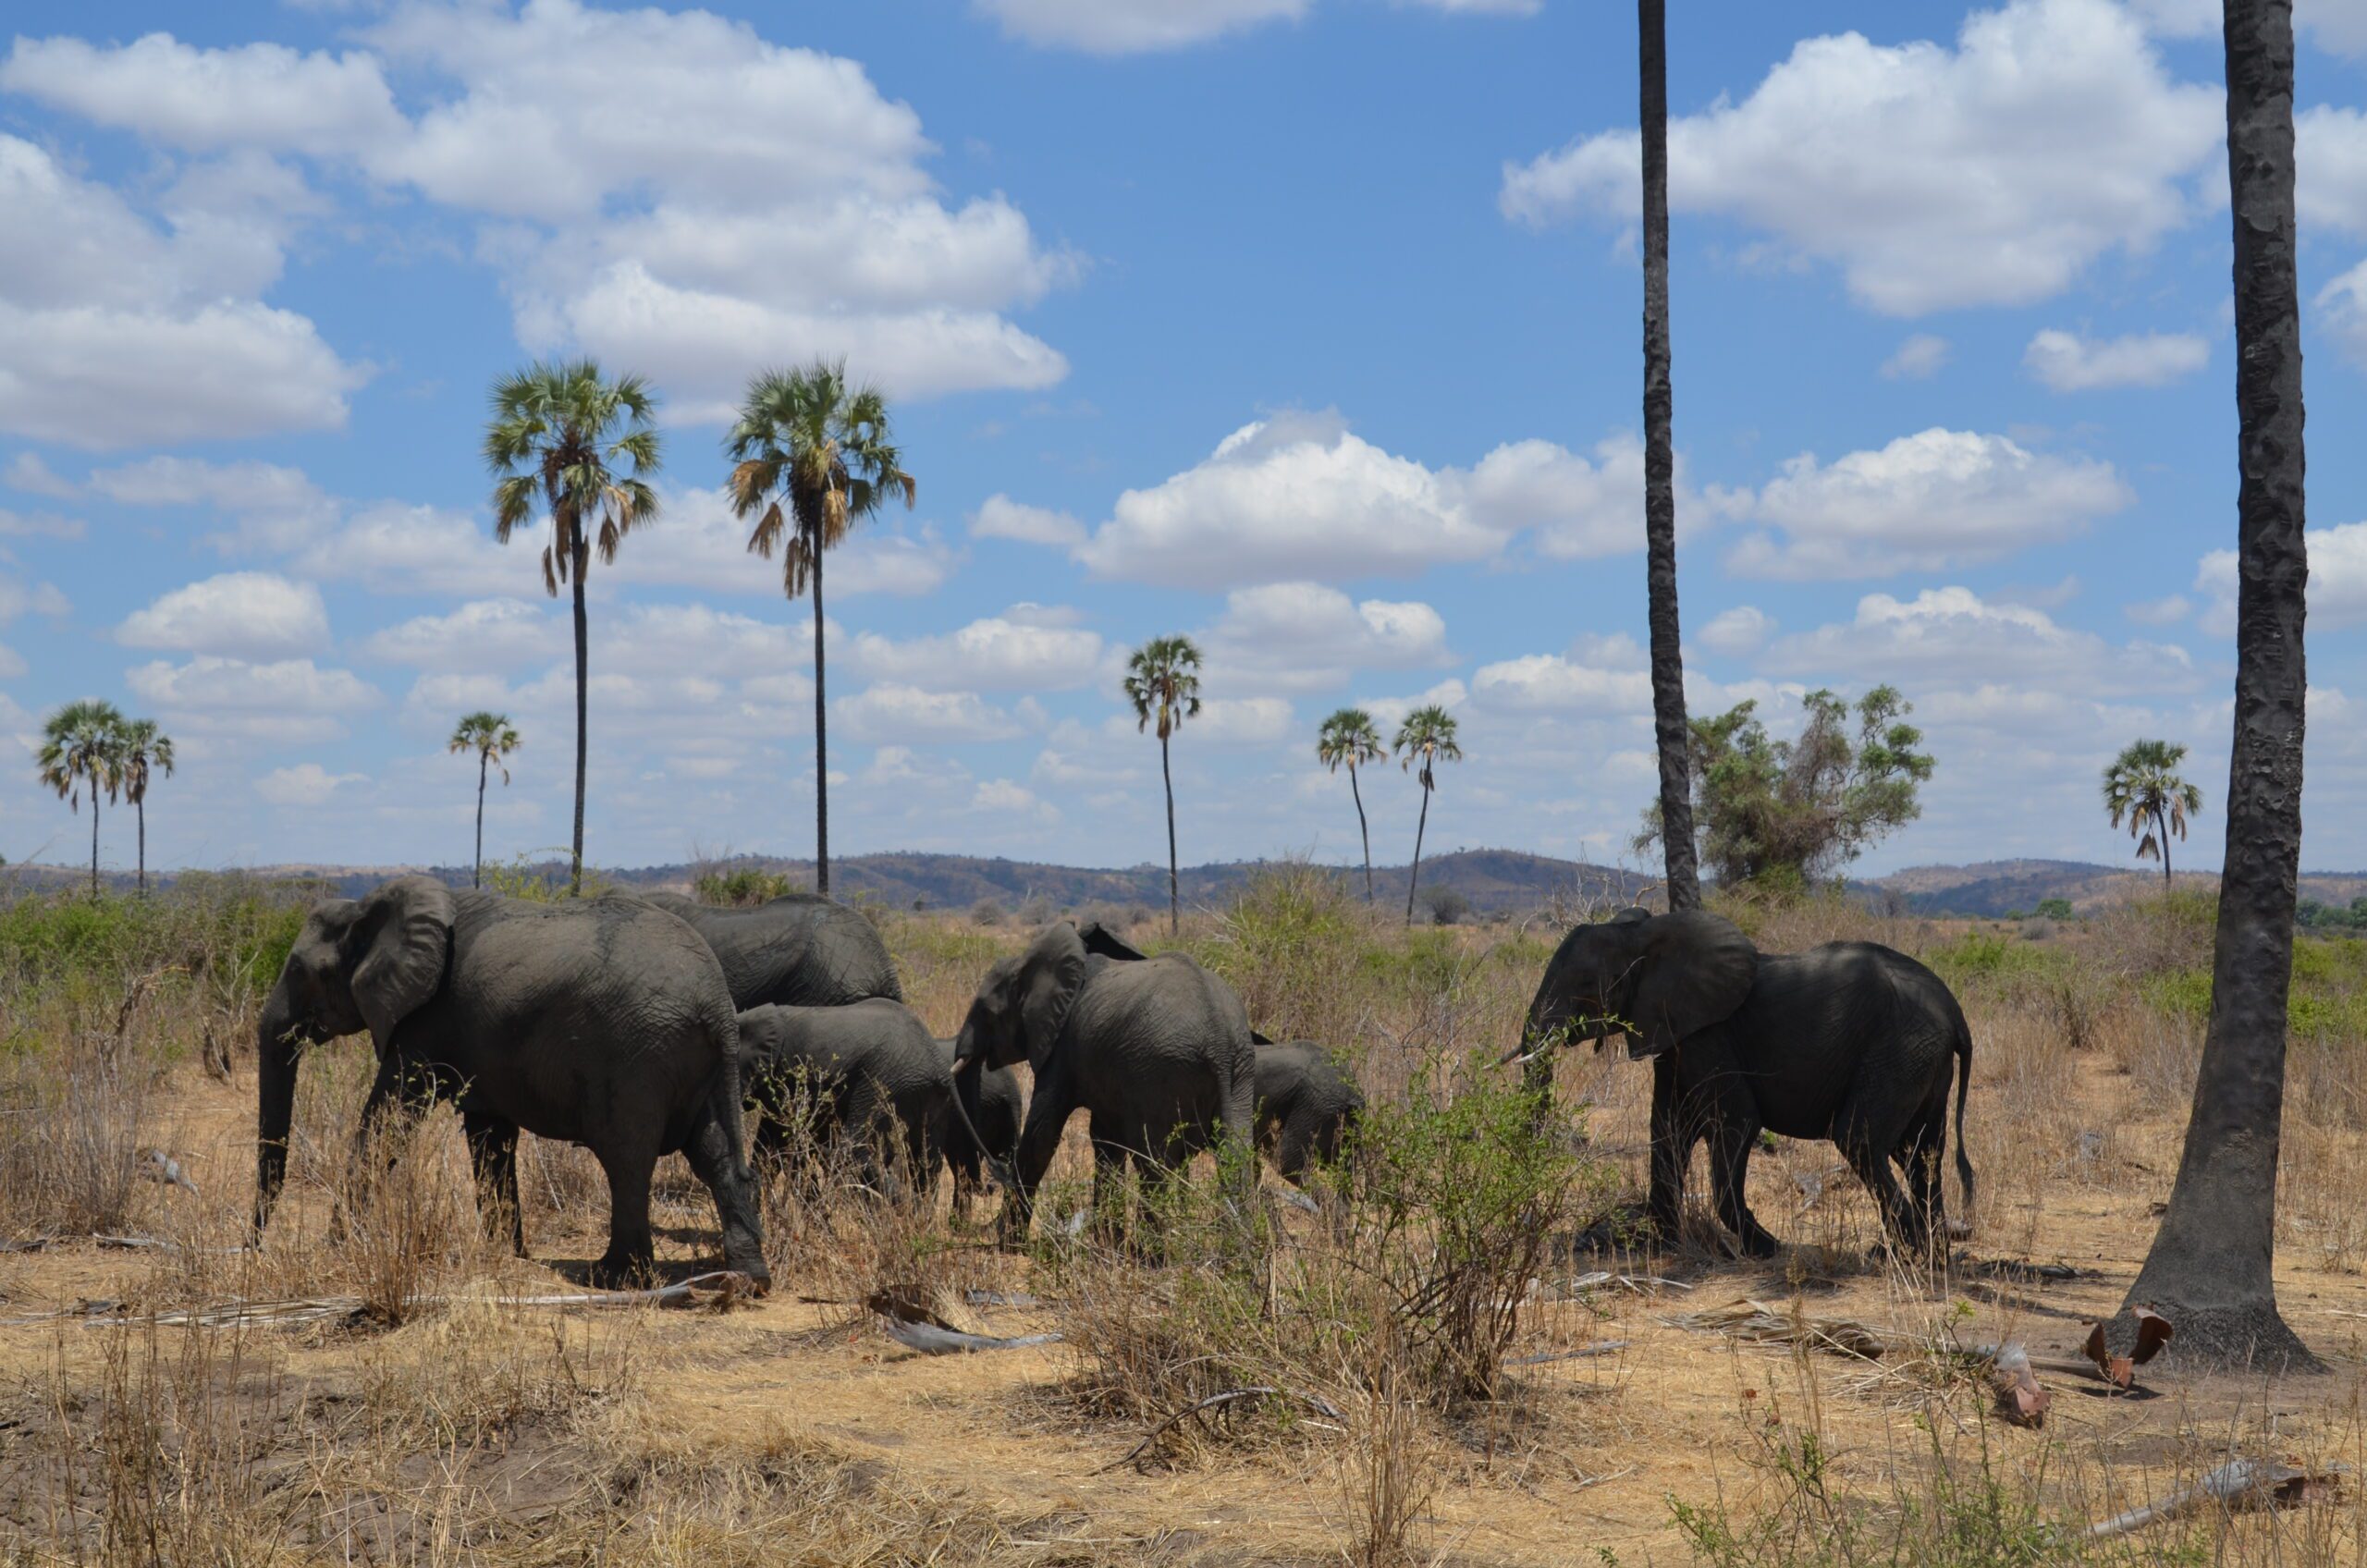 Insider Guide: 8 Things You Need to Know About Tanzania's Southern Circuit, Elephants Taking a Walk